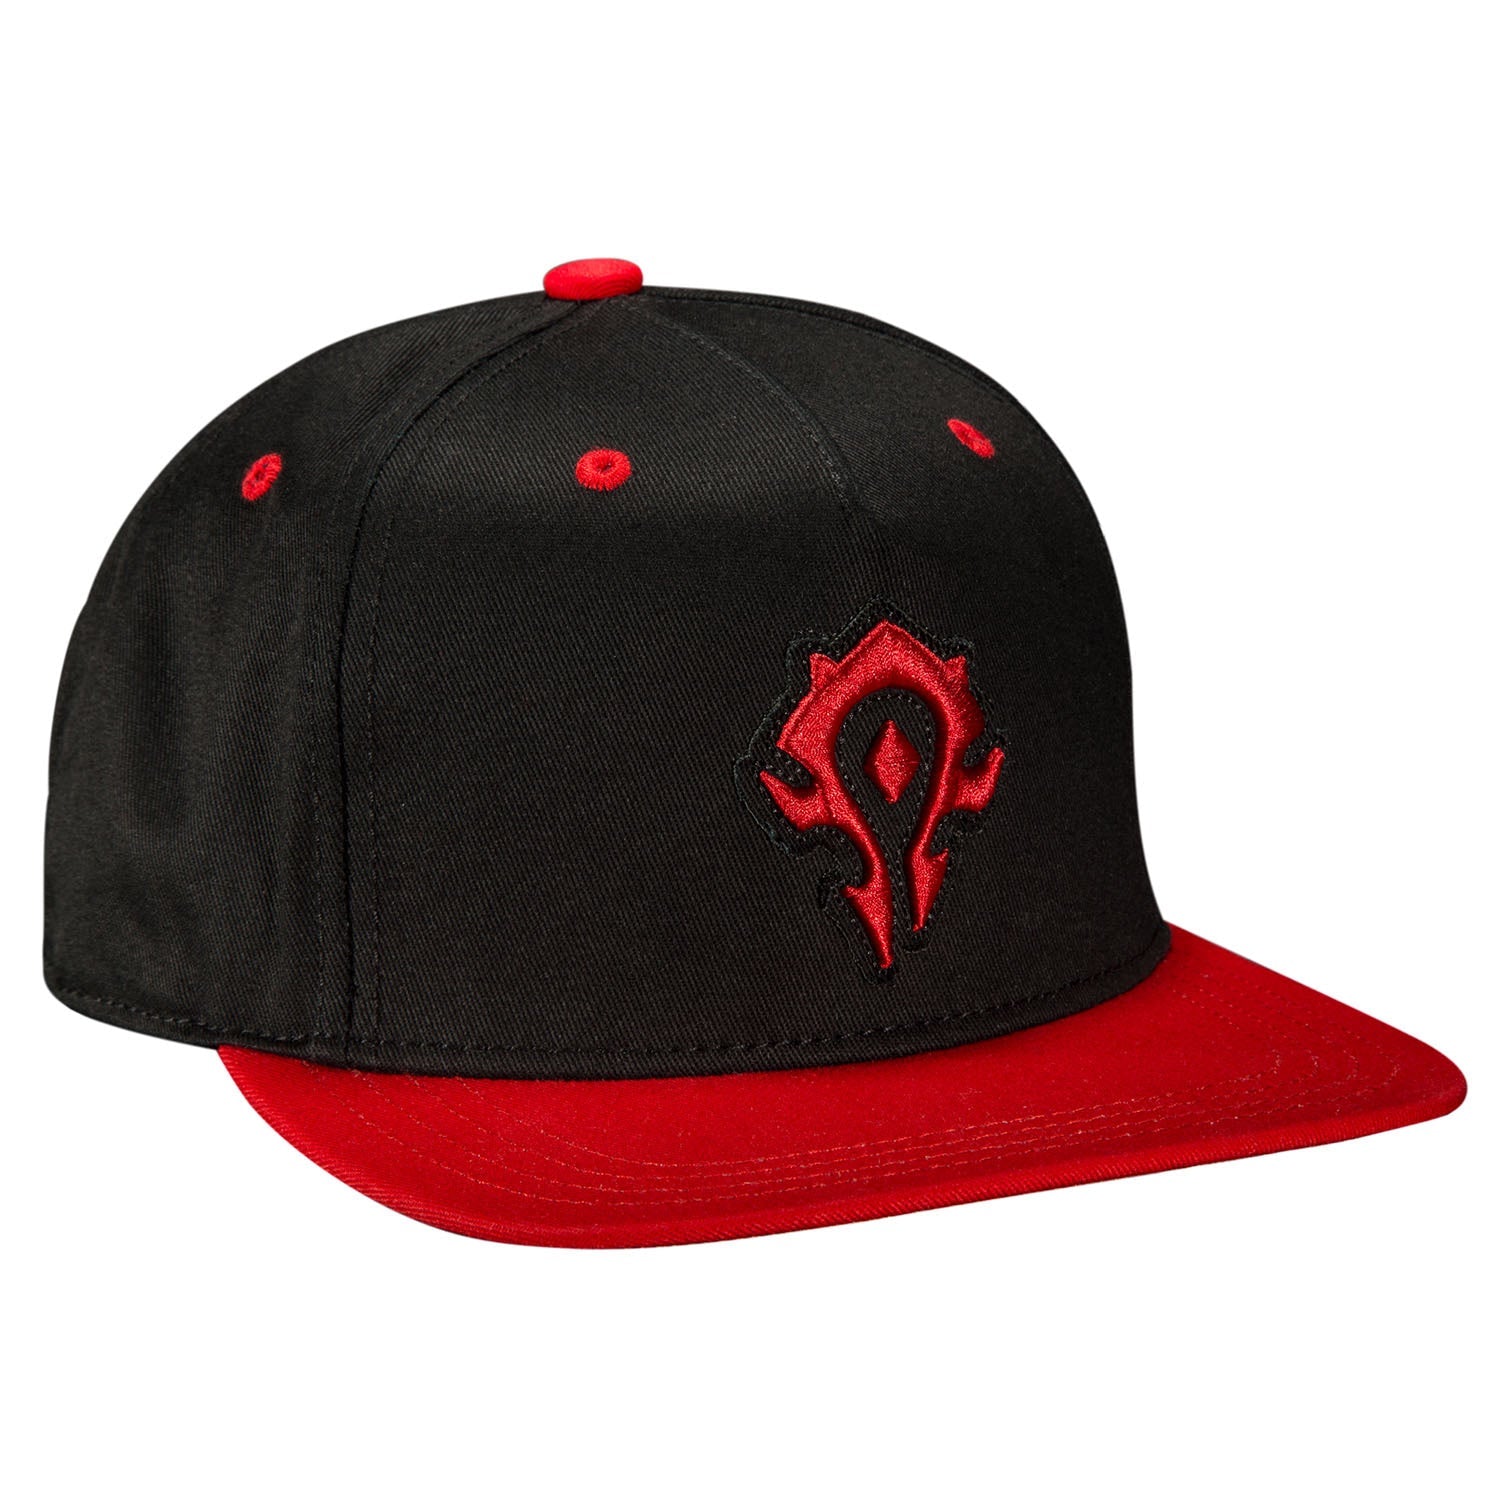 World of Warcraft Horde J!NX Black Snapback Hat - Front Right View